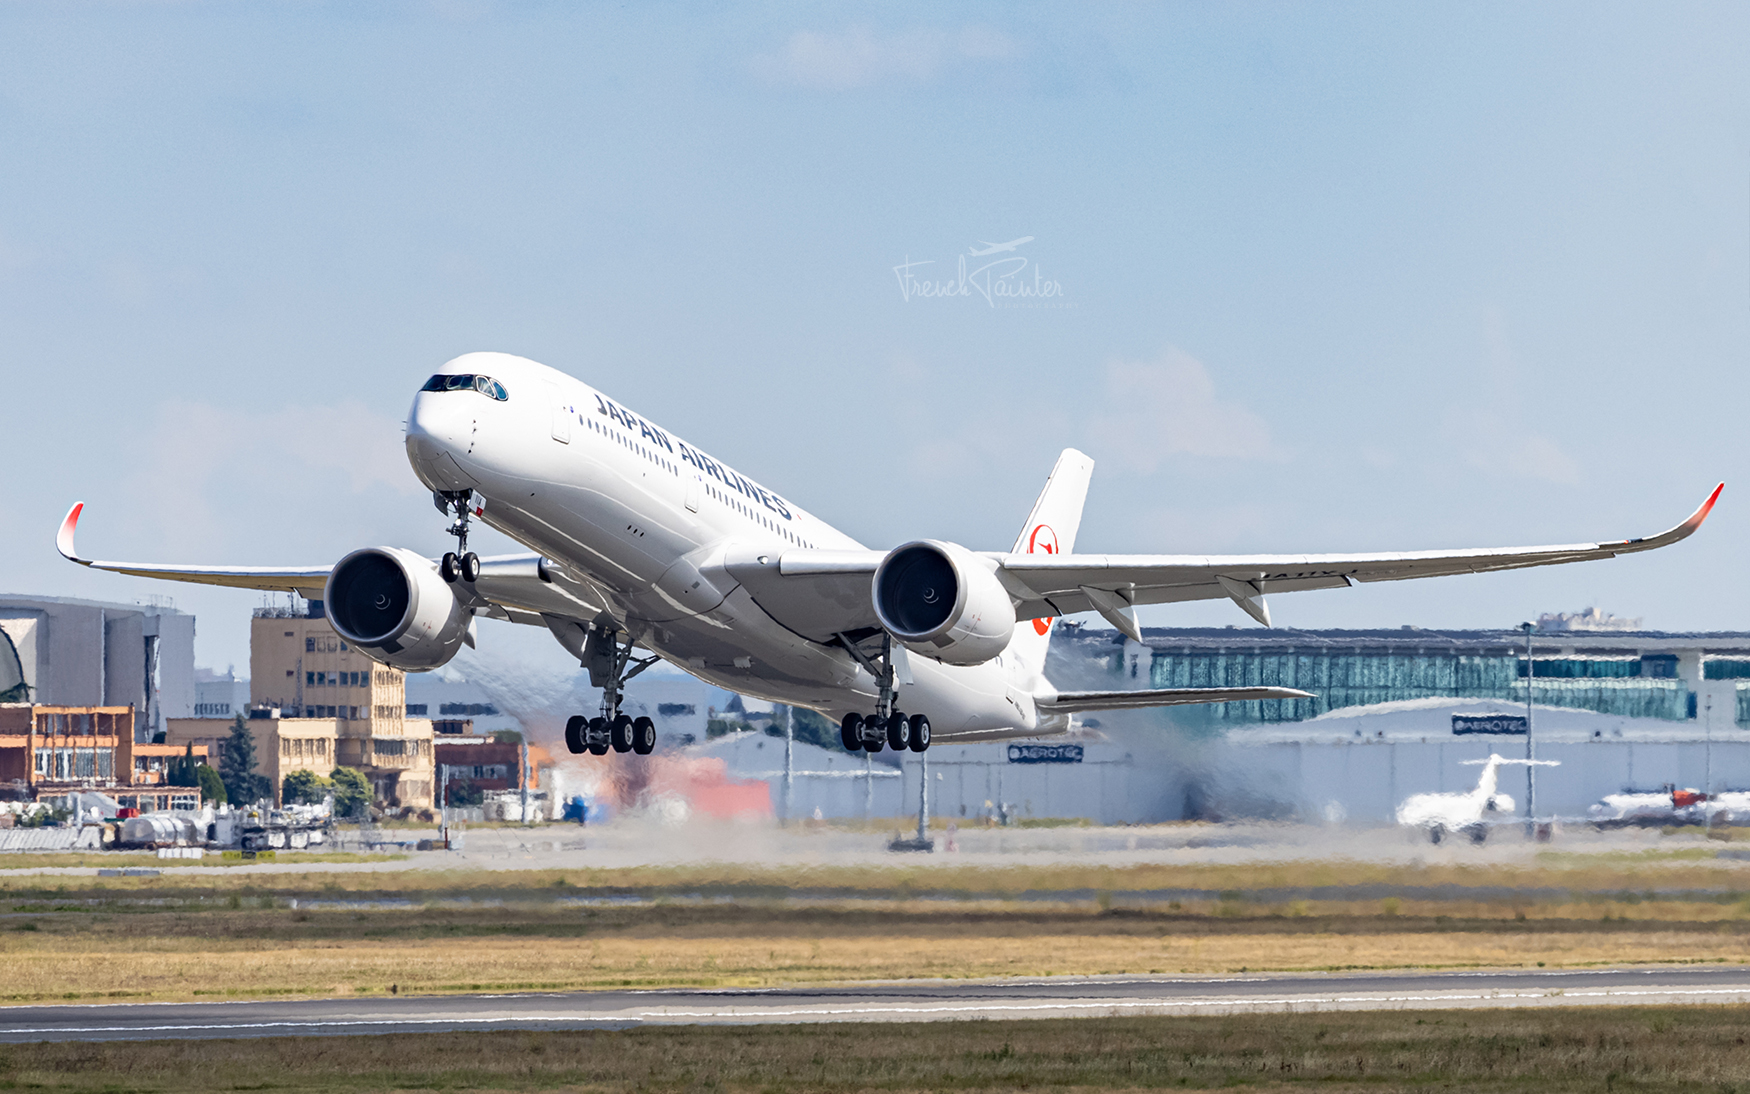 Aviation Toulouse Ja11xj The 11th Airbus A350 For Jal Airlines Left Toulouse Today With A Magnificent Wing Wave Japan Avgeek T Co Gppma4uae3 Twitter